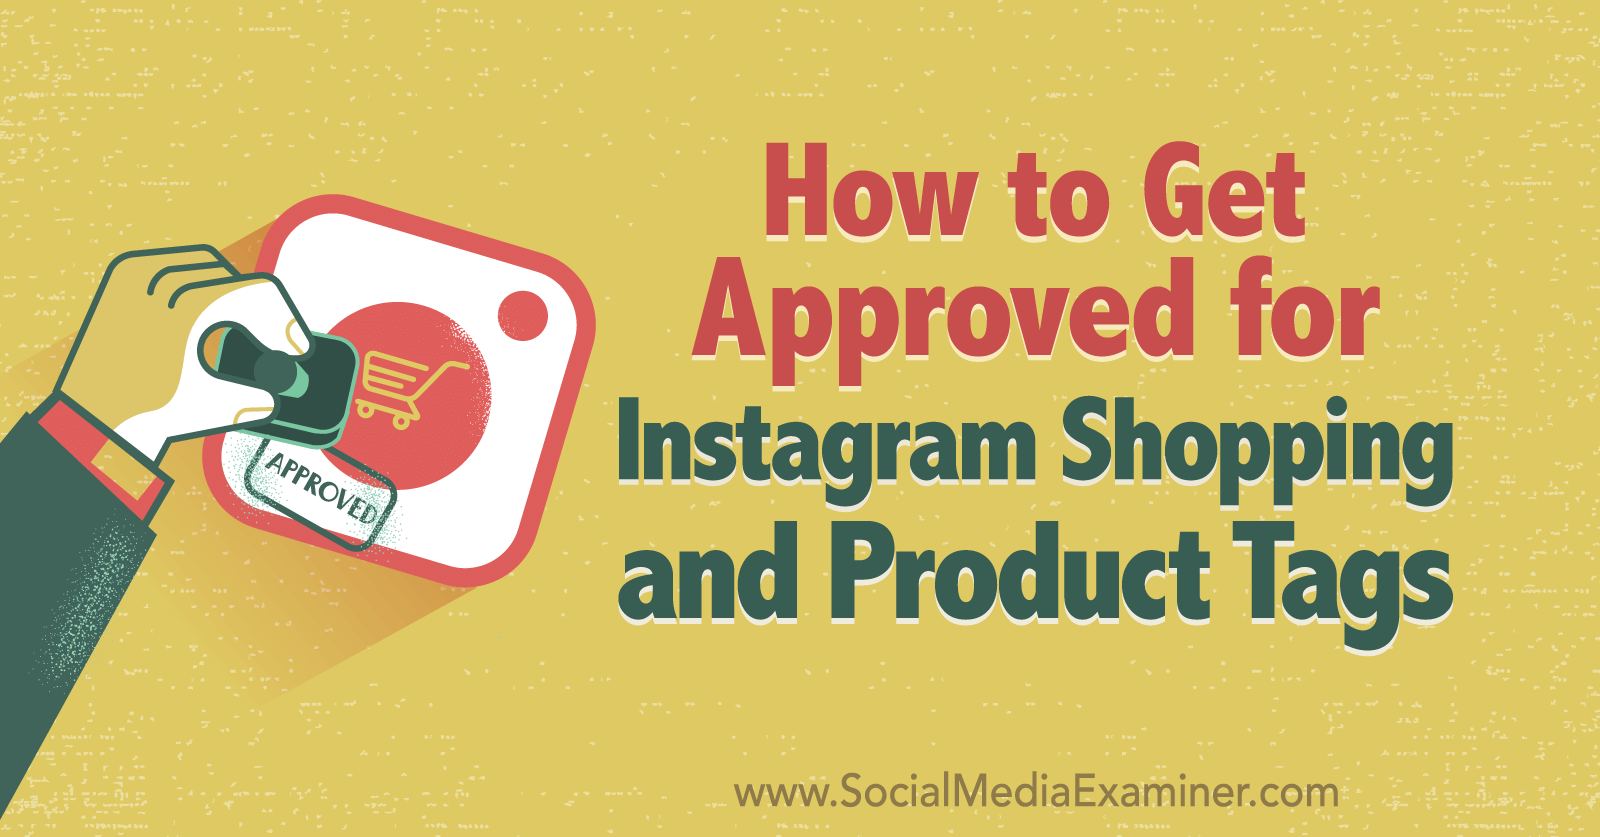 How To Get Approved For Instagram Shopping And Product Tags Social Media Examiner